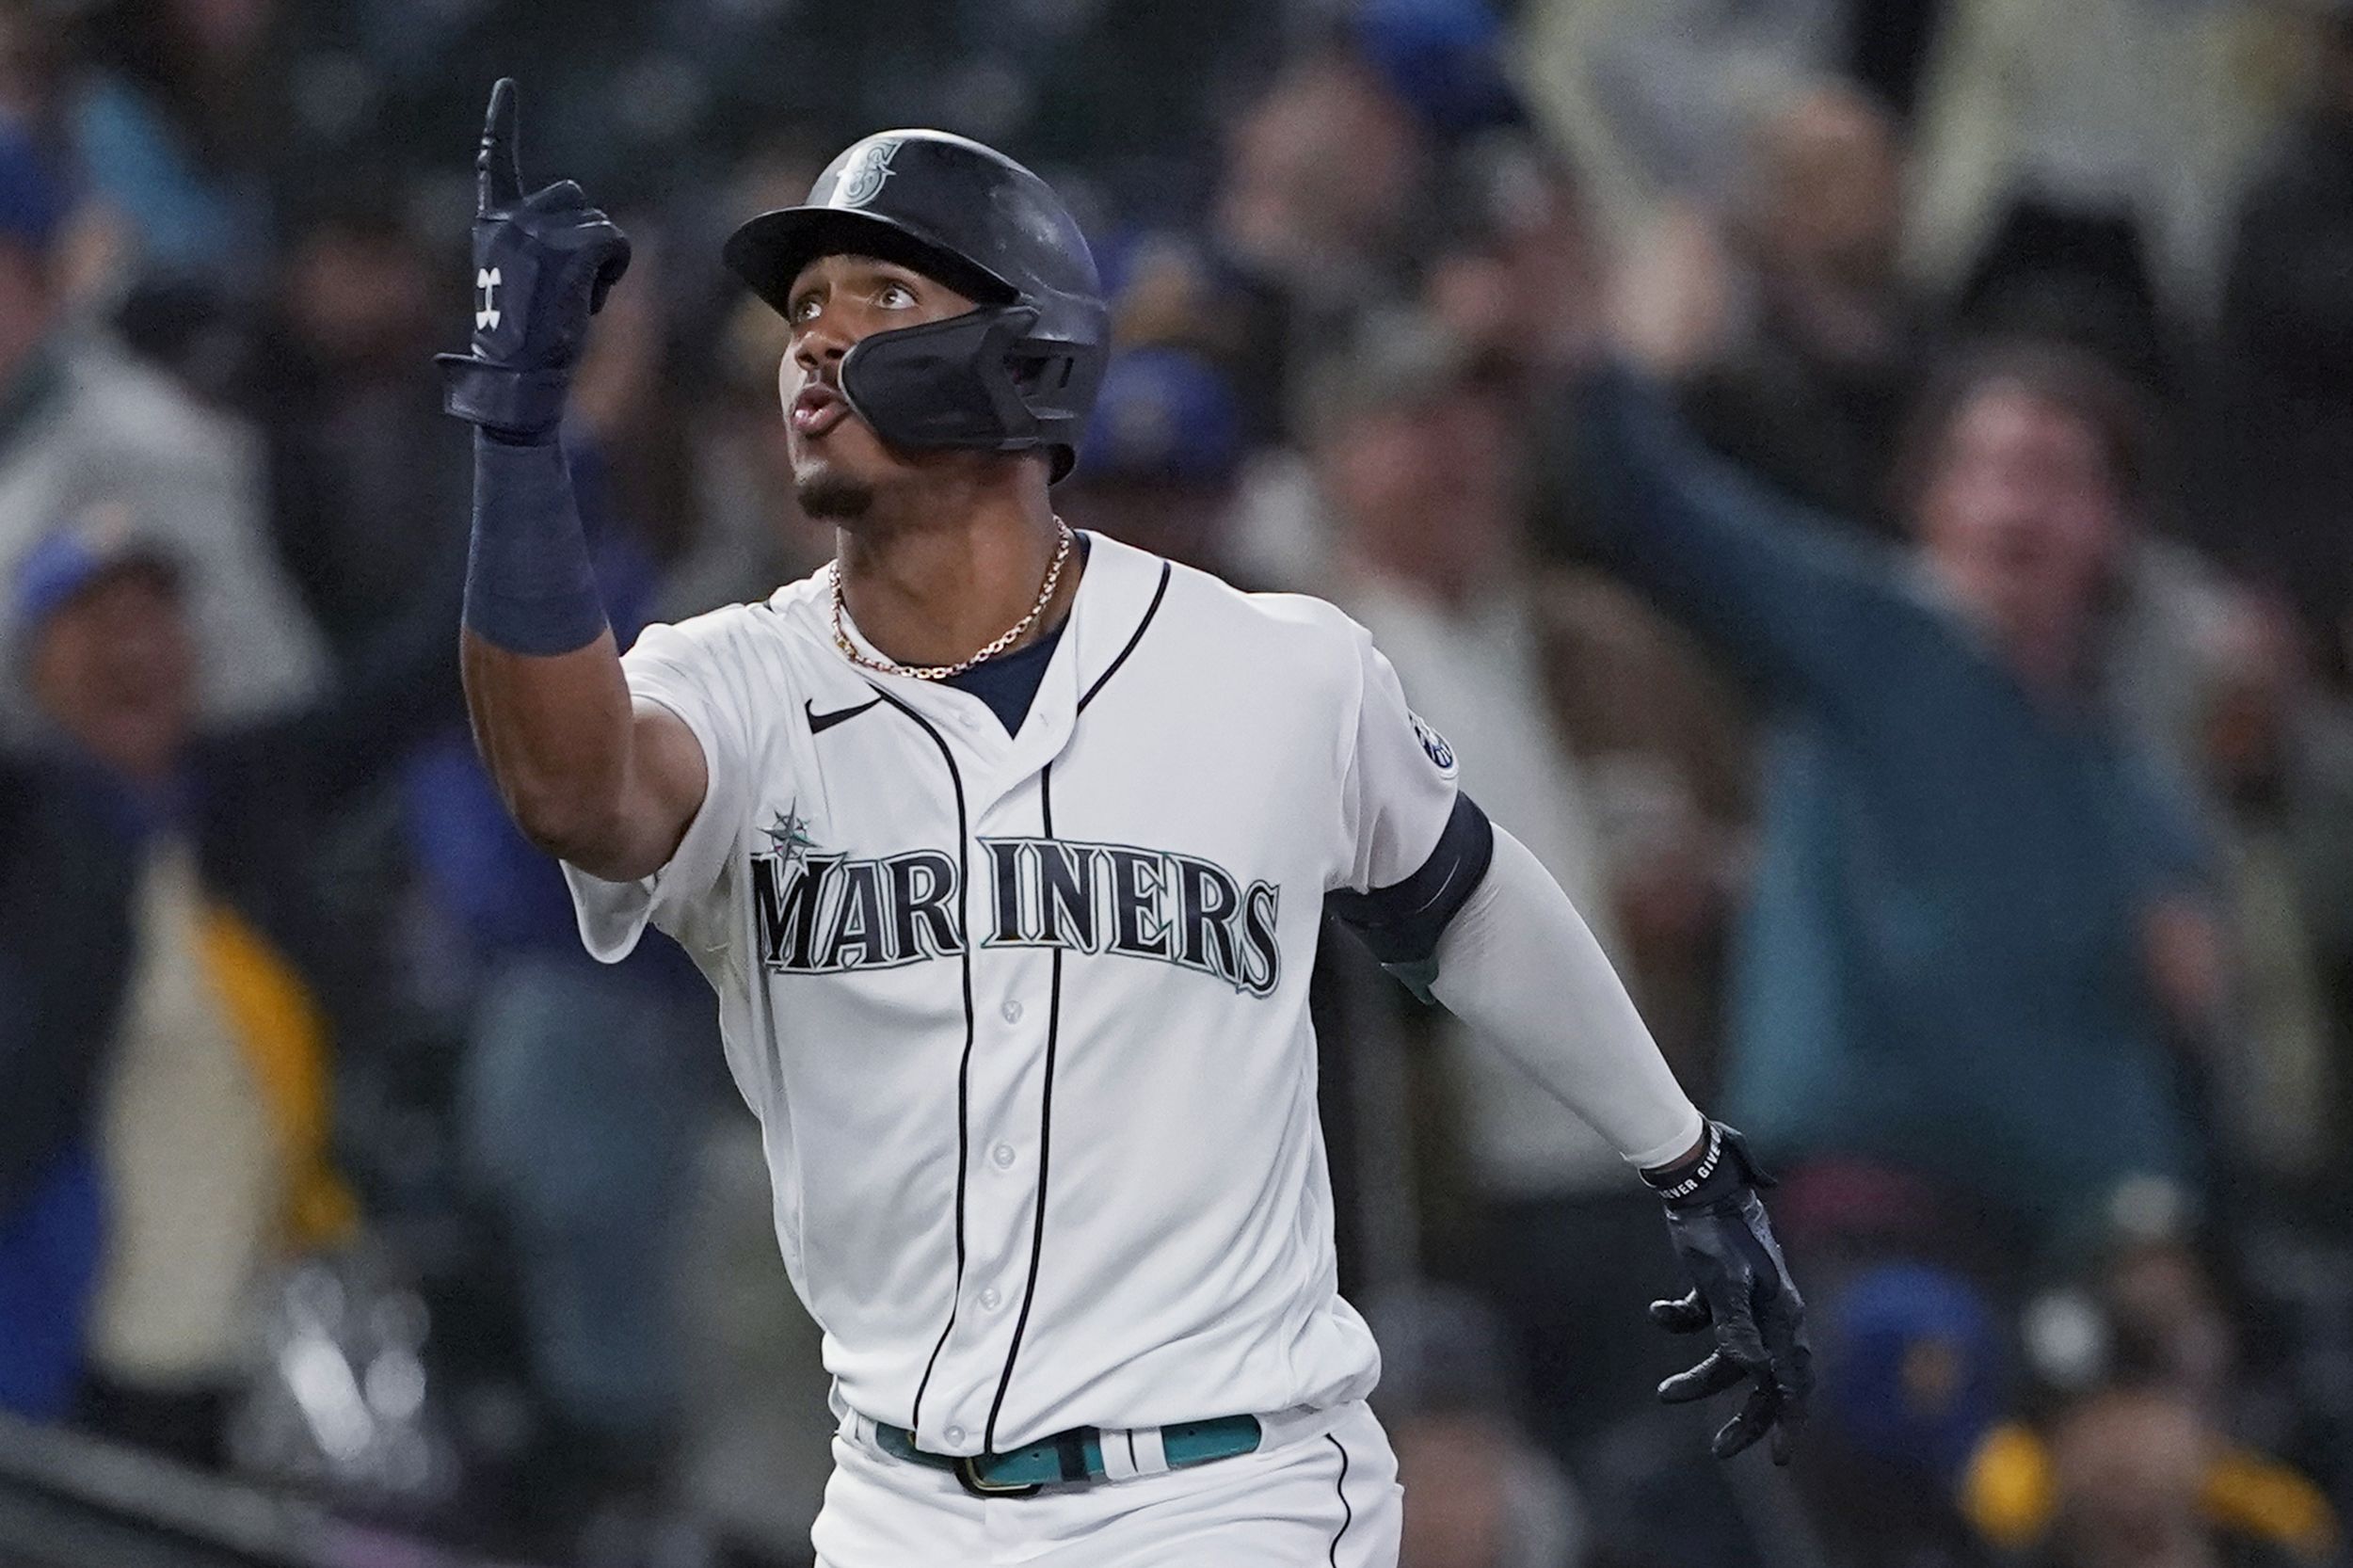 Seattle Mariners' Julio Rodriguez smiles while standing next to